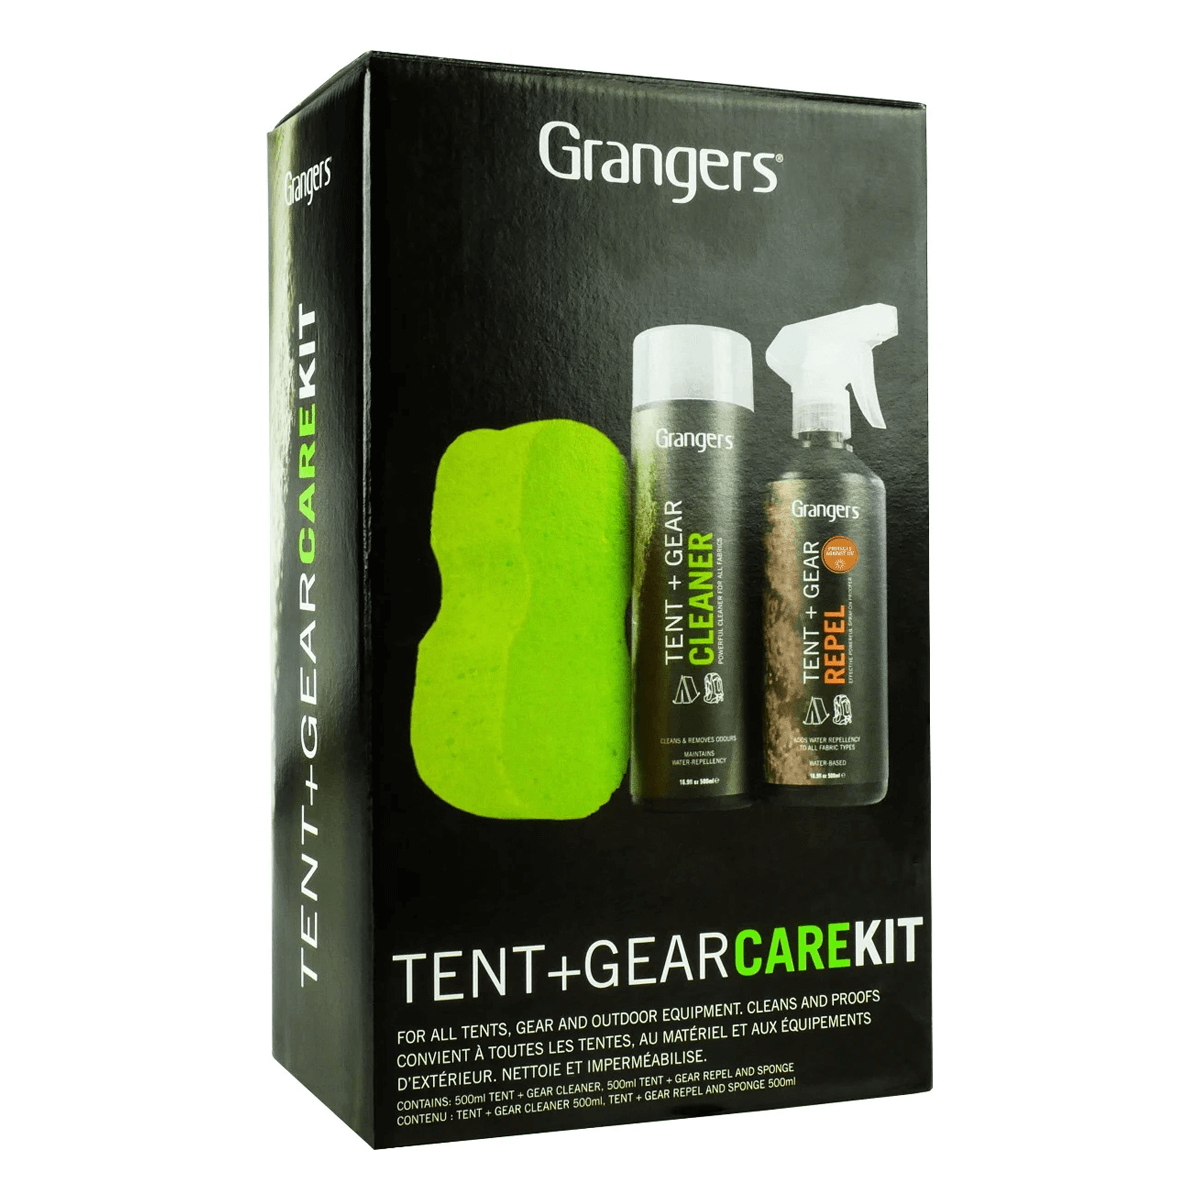 Grf97 Grangers Tent And Gear Care Kit 01 1600x1600